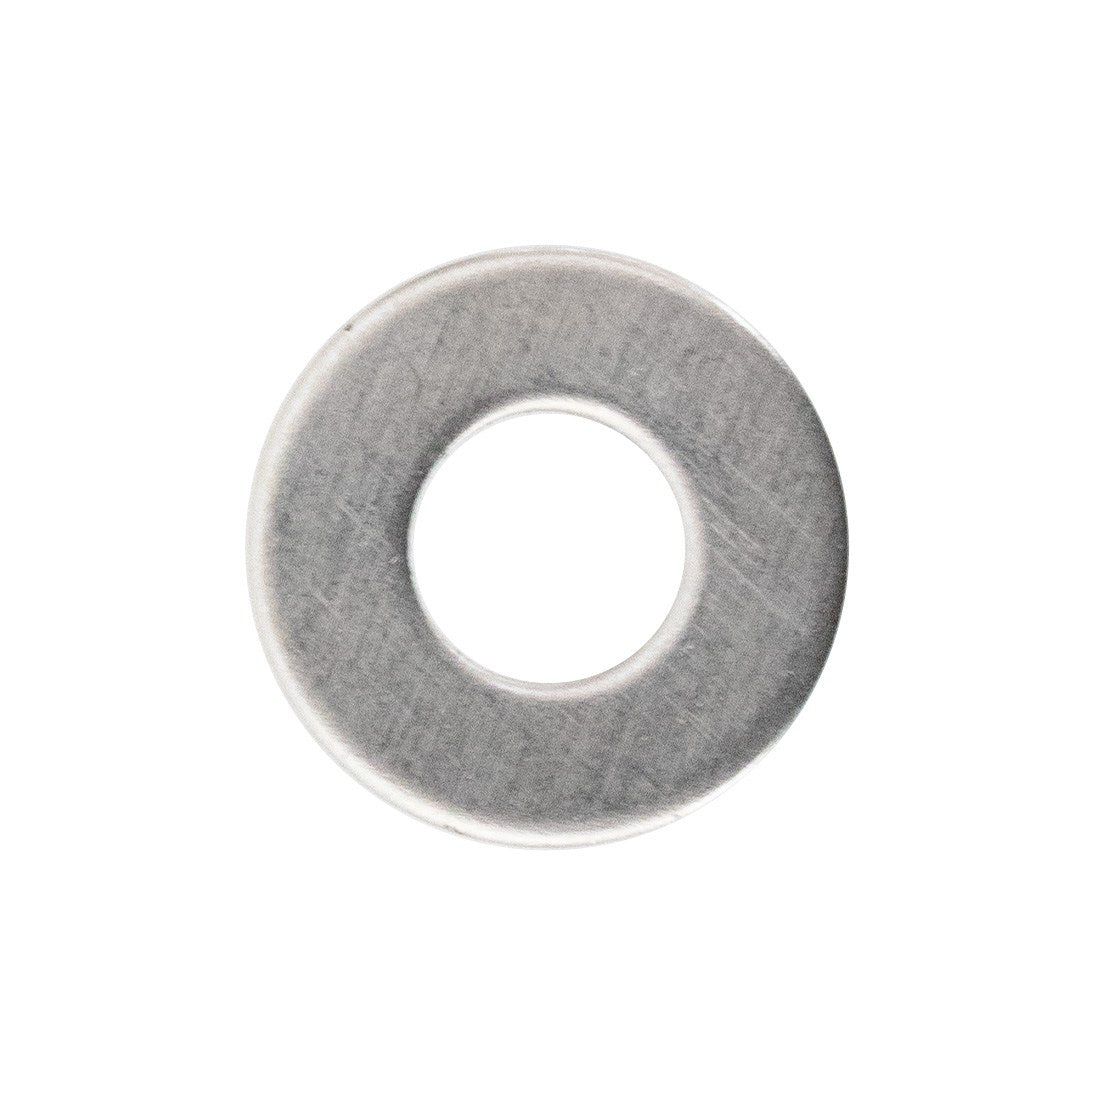 XERO Pure Flat Washer USS 1/4 SS Front View